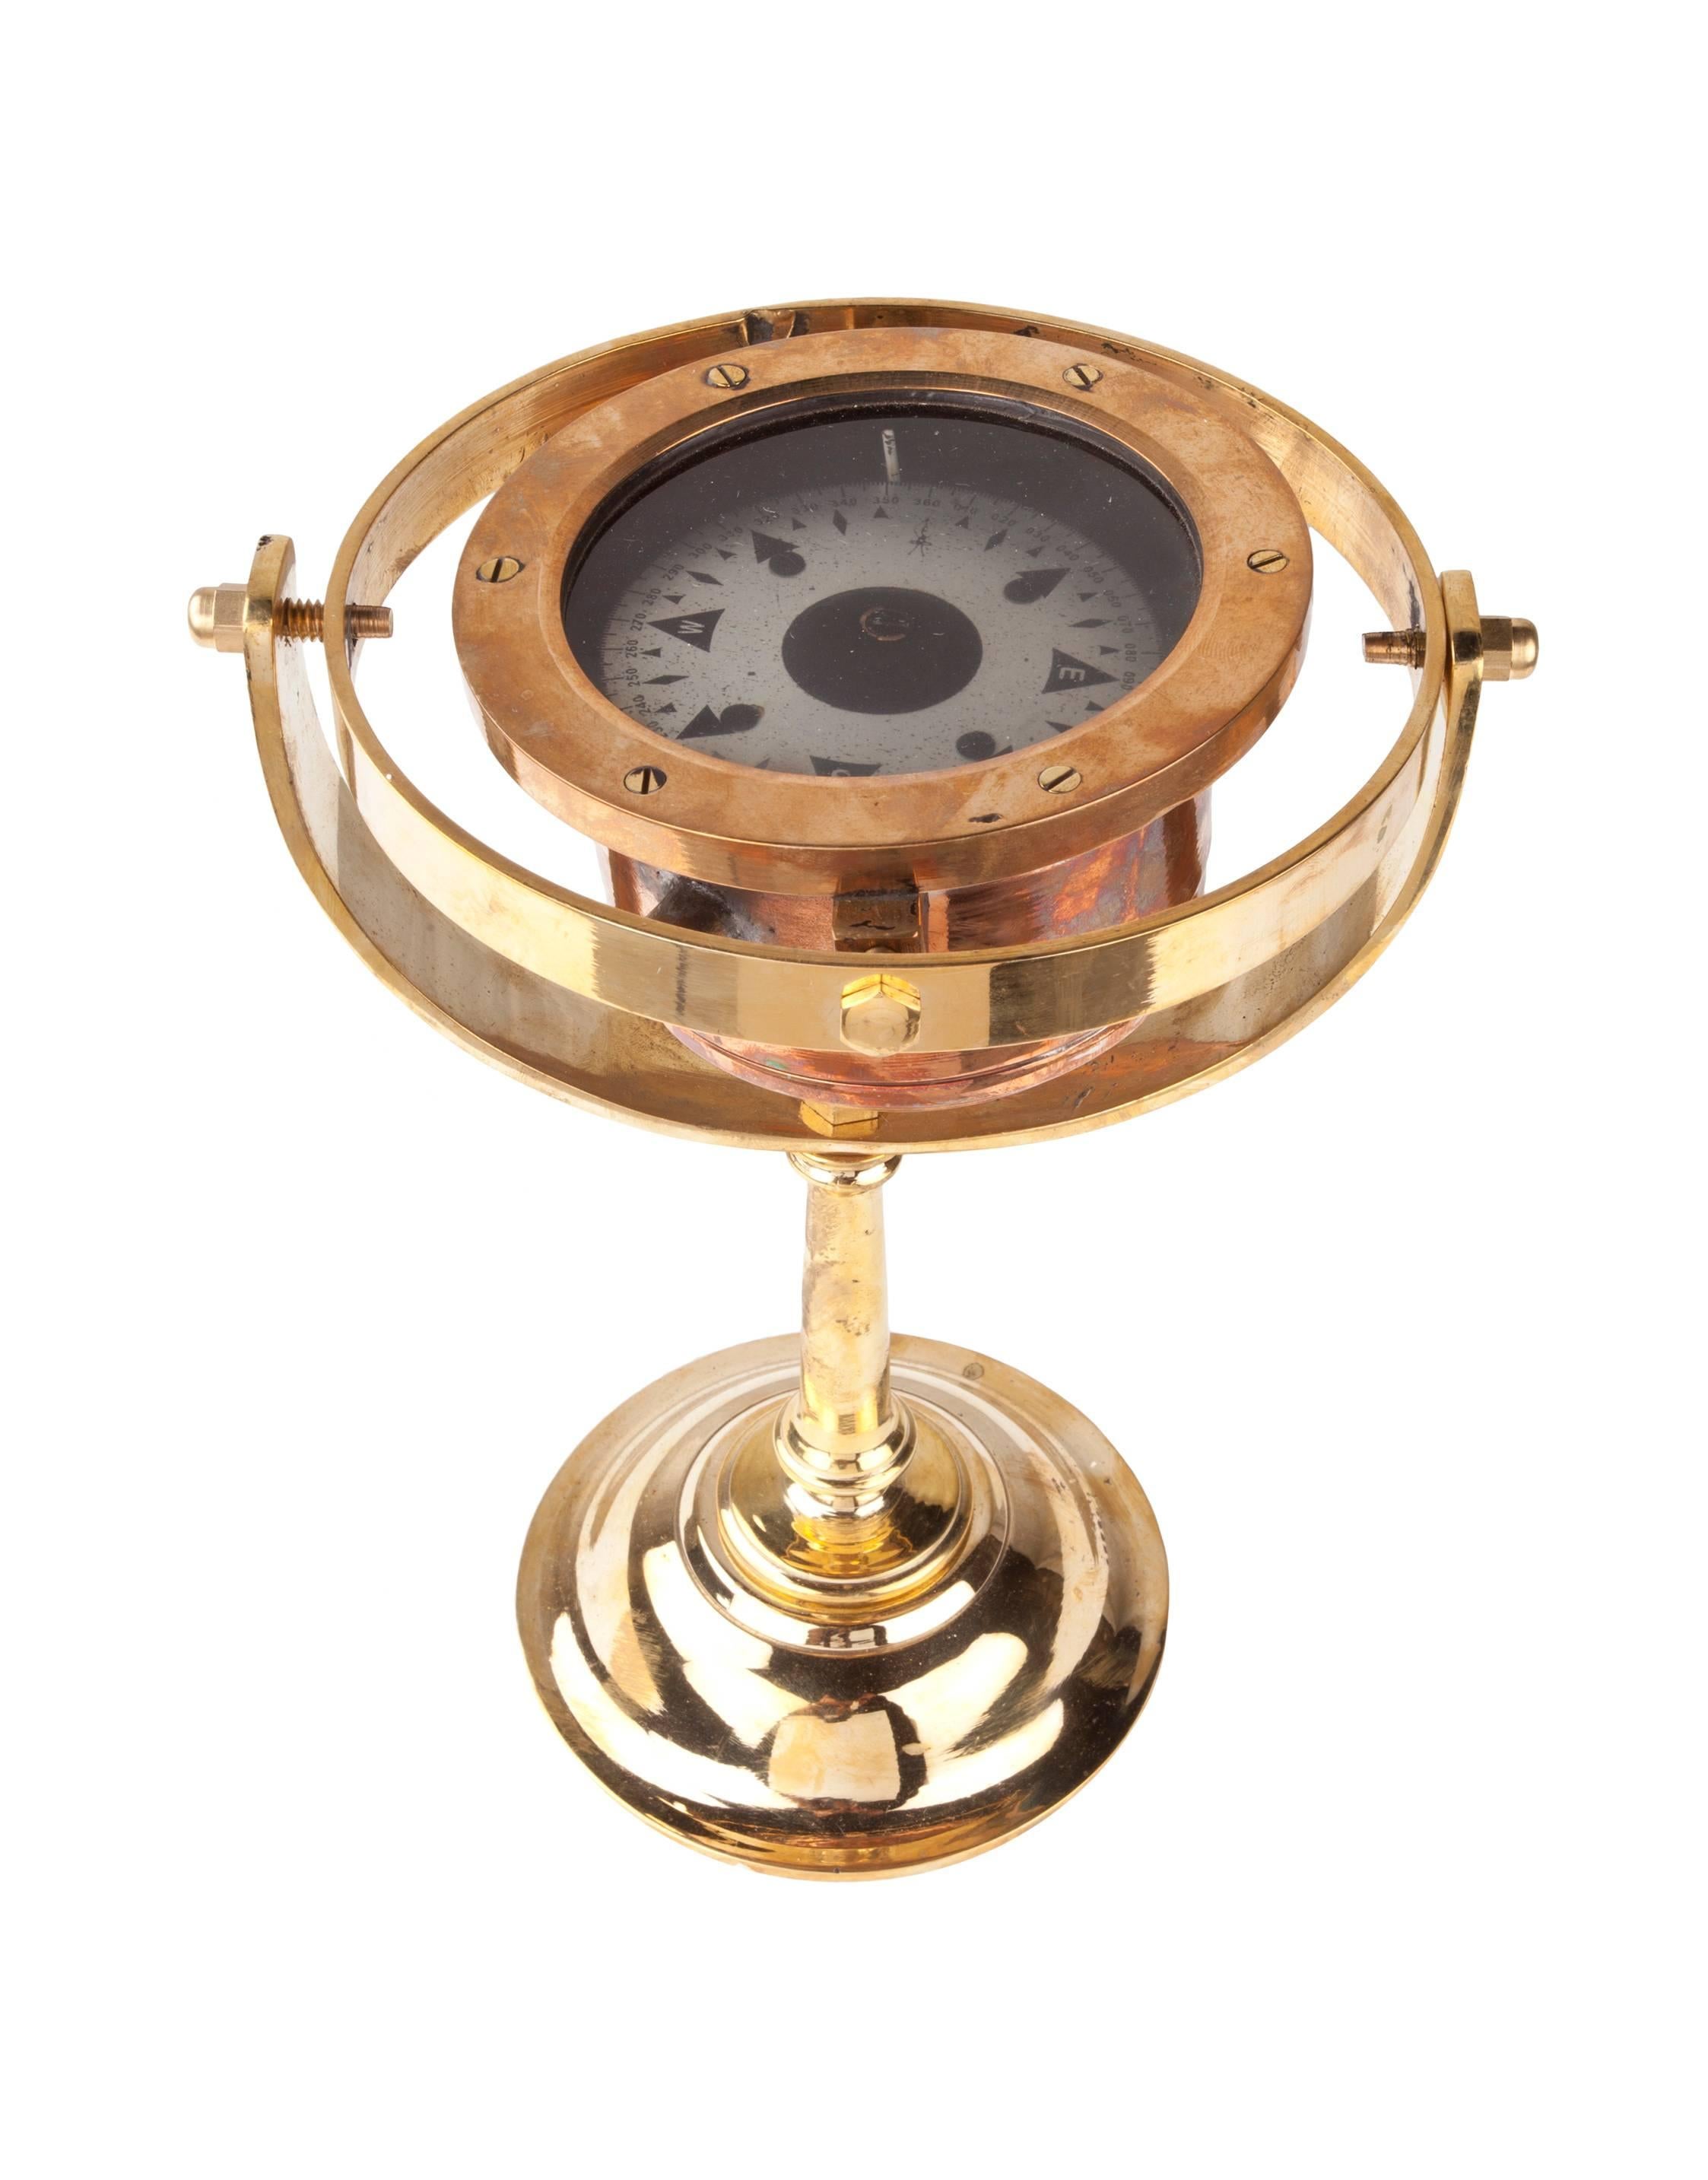 A working compass from a ship's lifeboat, circa 1960s. Gimbaled frame with a nickel face plate on a custom-made Y-shaped Stand. Rescued from it's wooden box, polished and ready for display. Compass itself is 4.75 inch diameter.

Nautical Antiques